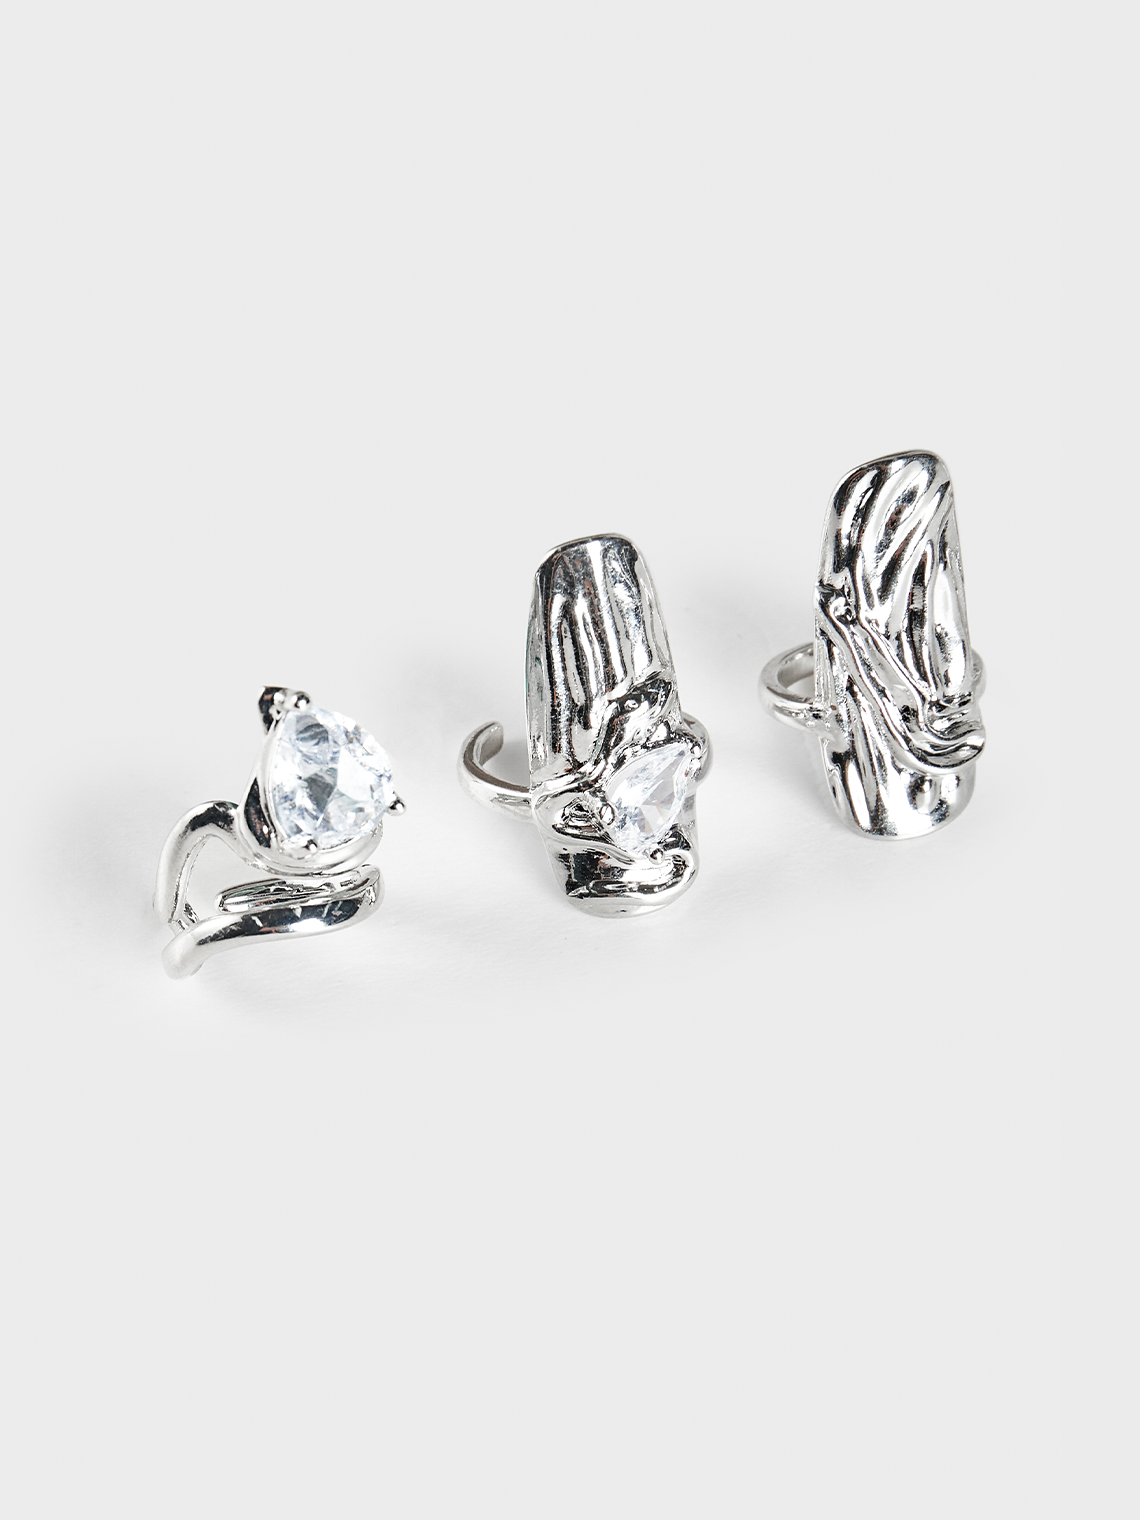 Edgy Silver Accessory Rings